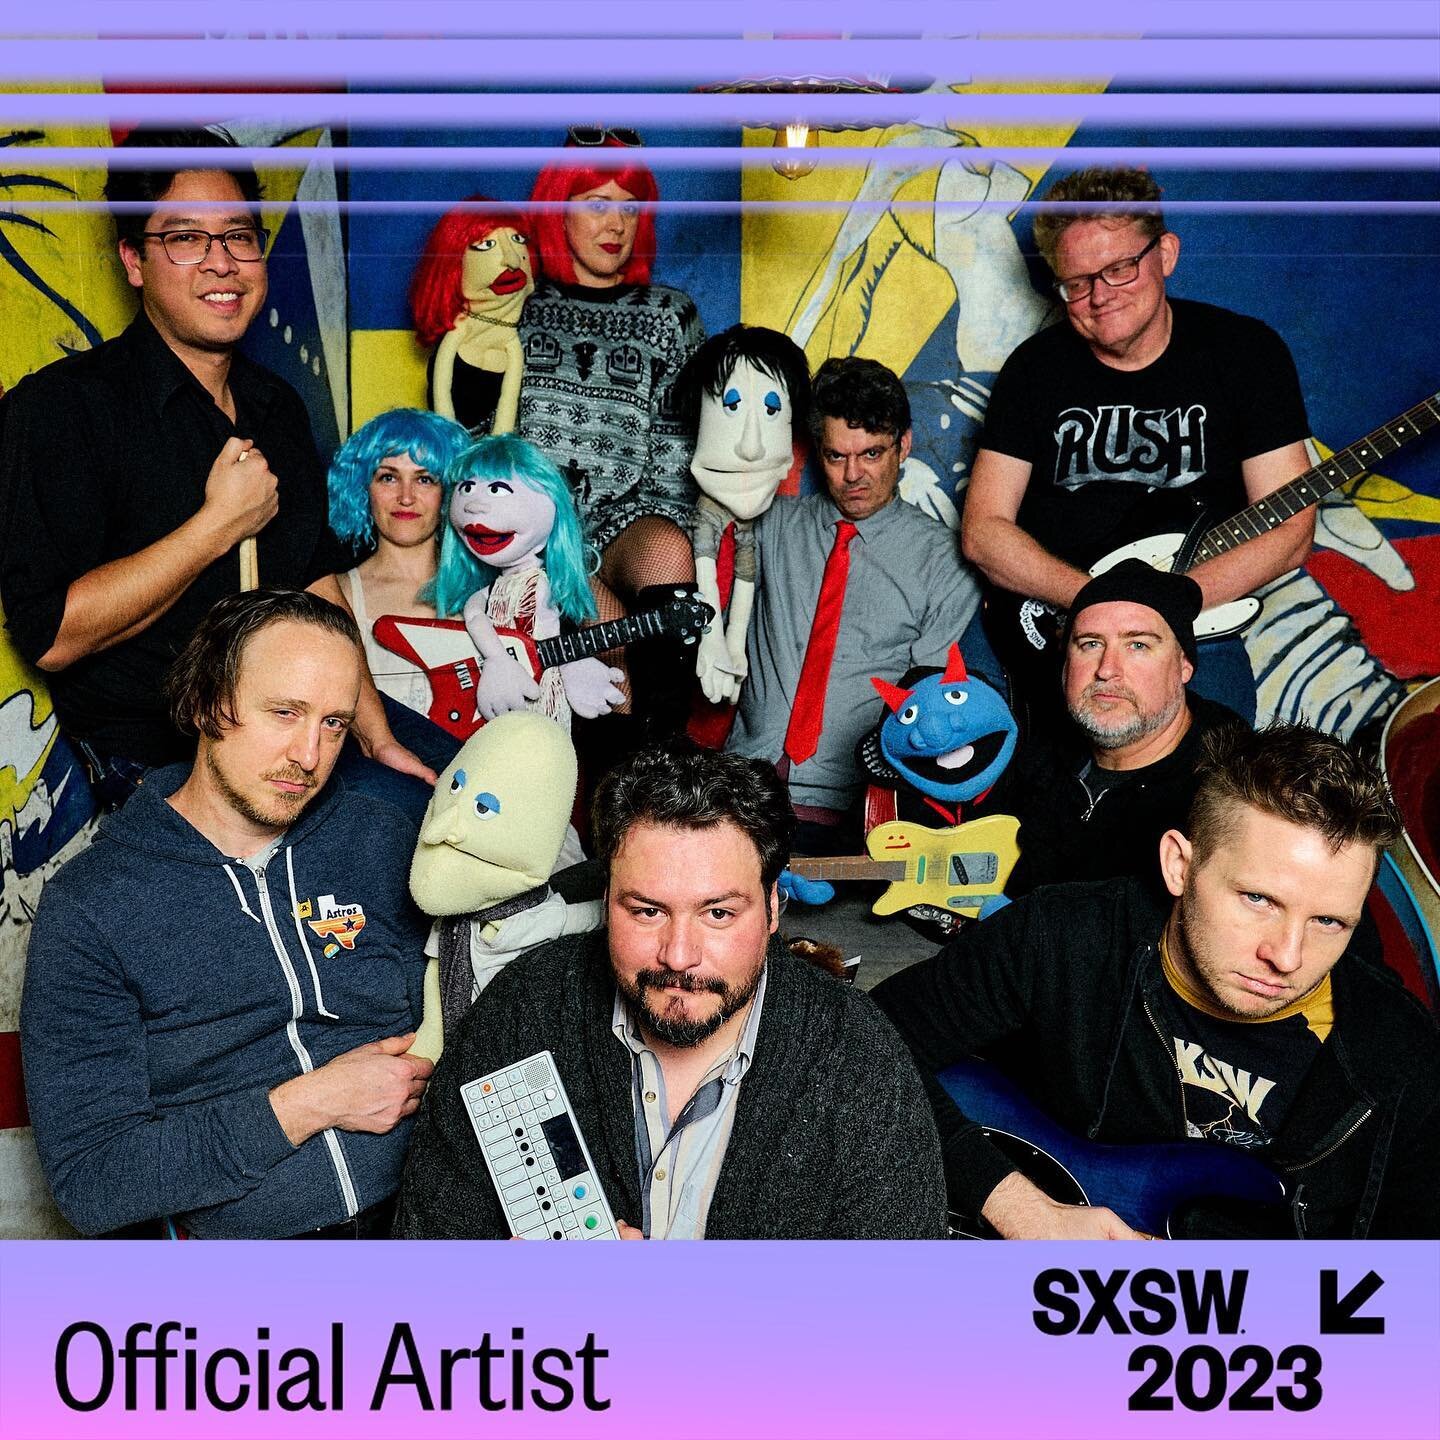 The only emo puppet band at #sxsw2023 (that we know of) 

SAD BY SAD WEST SHOWS

3/17 at 7-7:25 pm (short set) at Latchkey
3/18 at 1 am (full set) at Esther&rsquo;s Follies